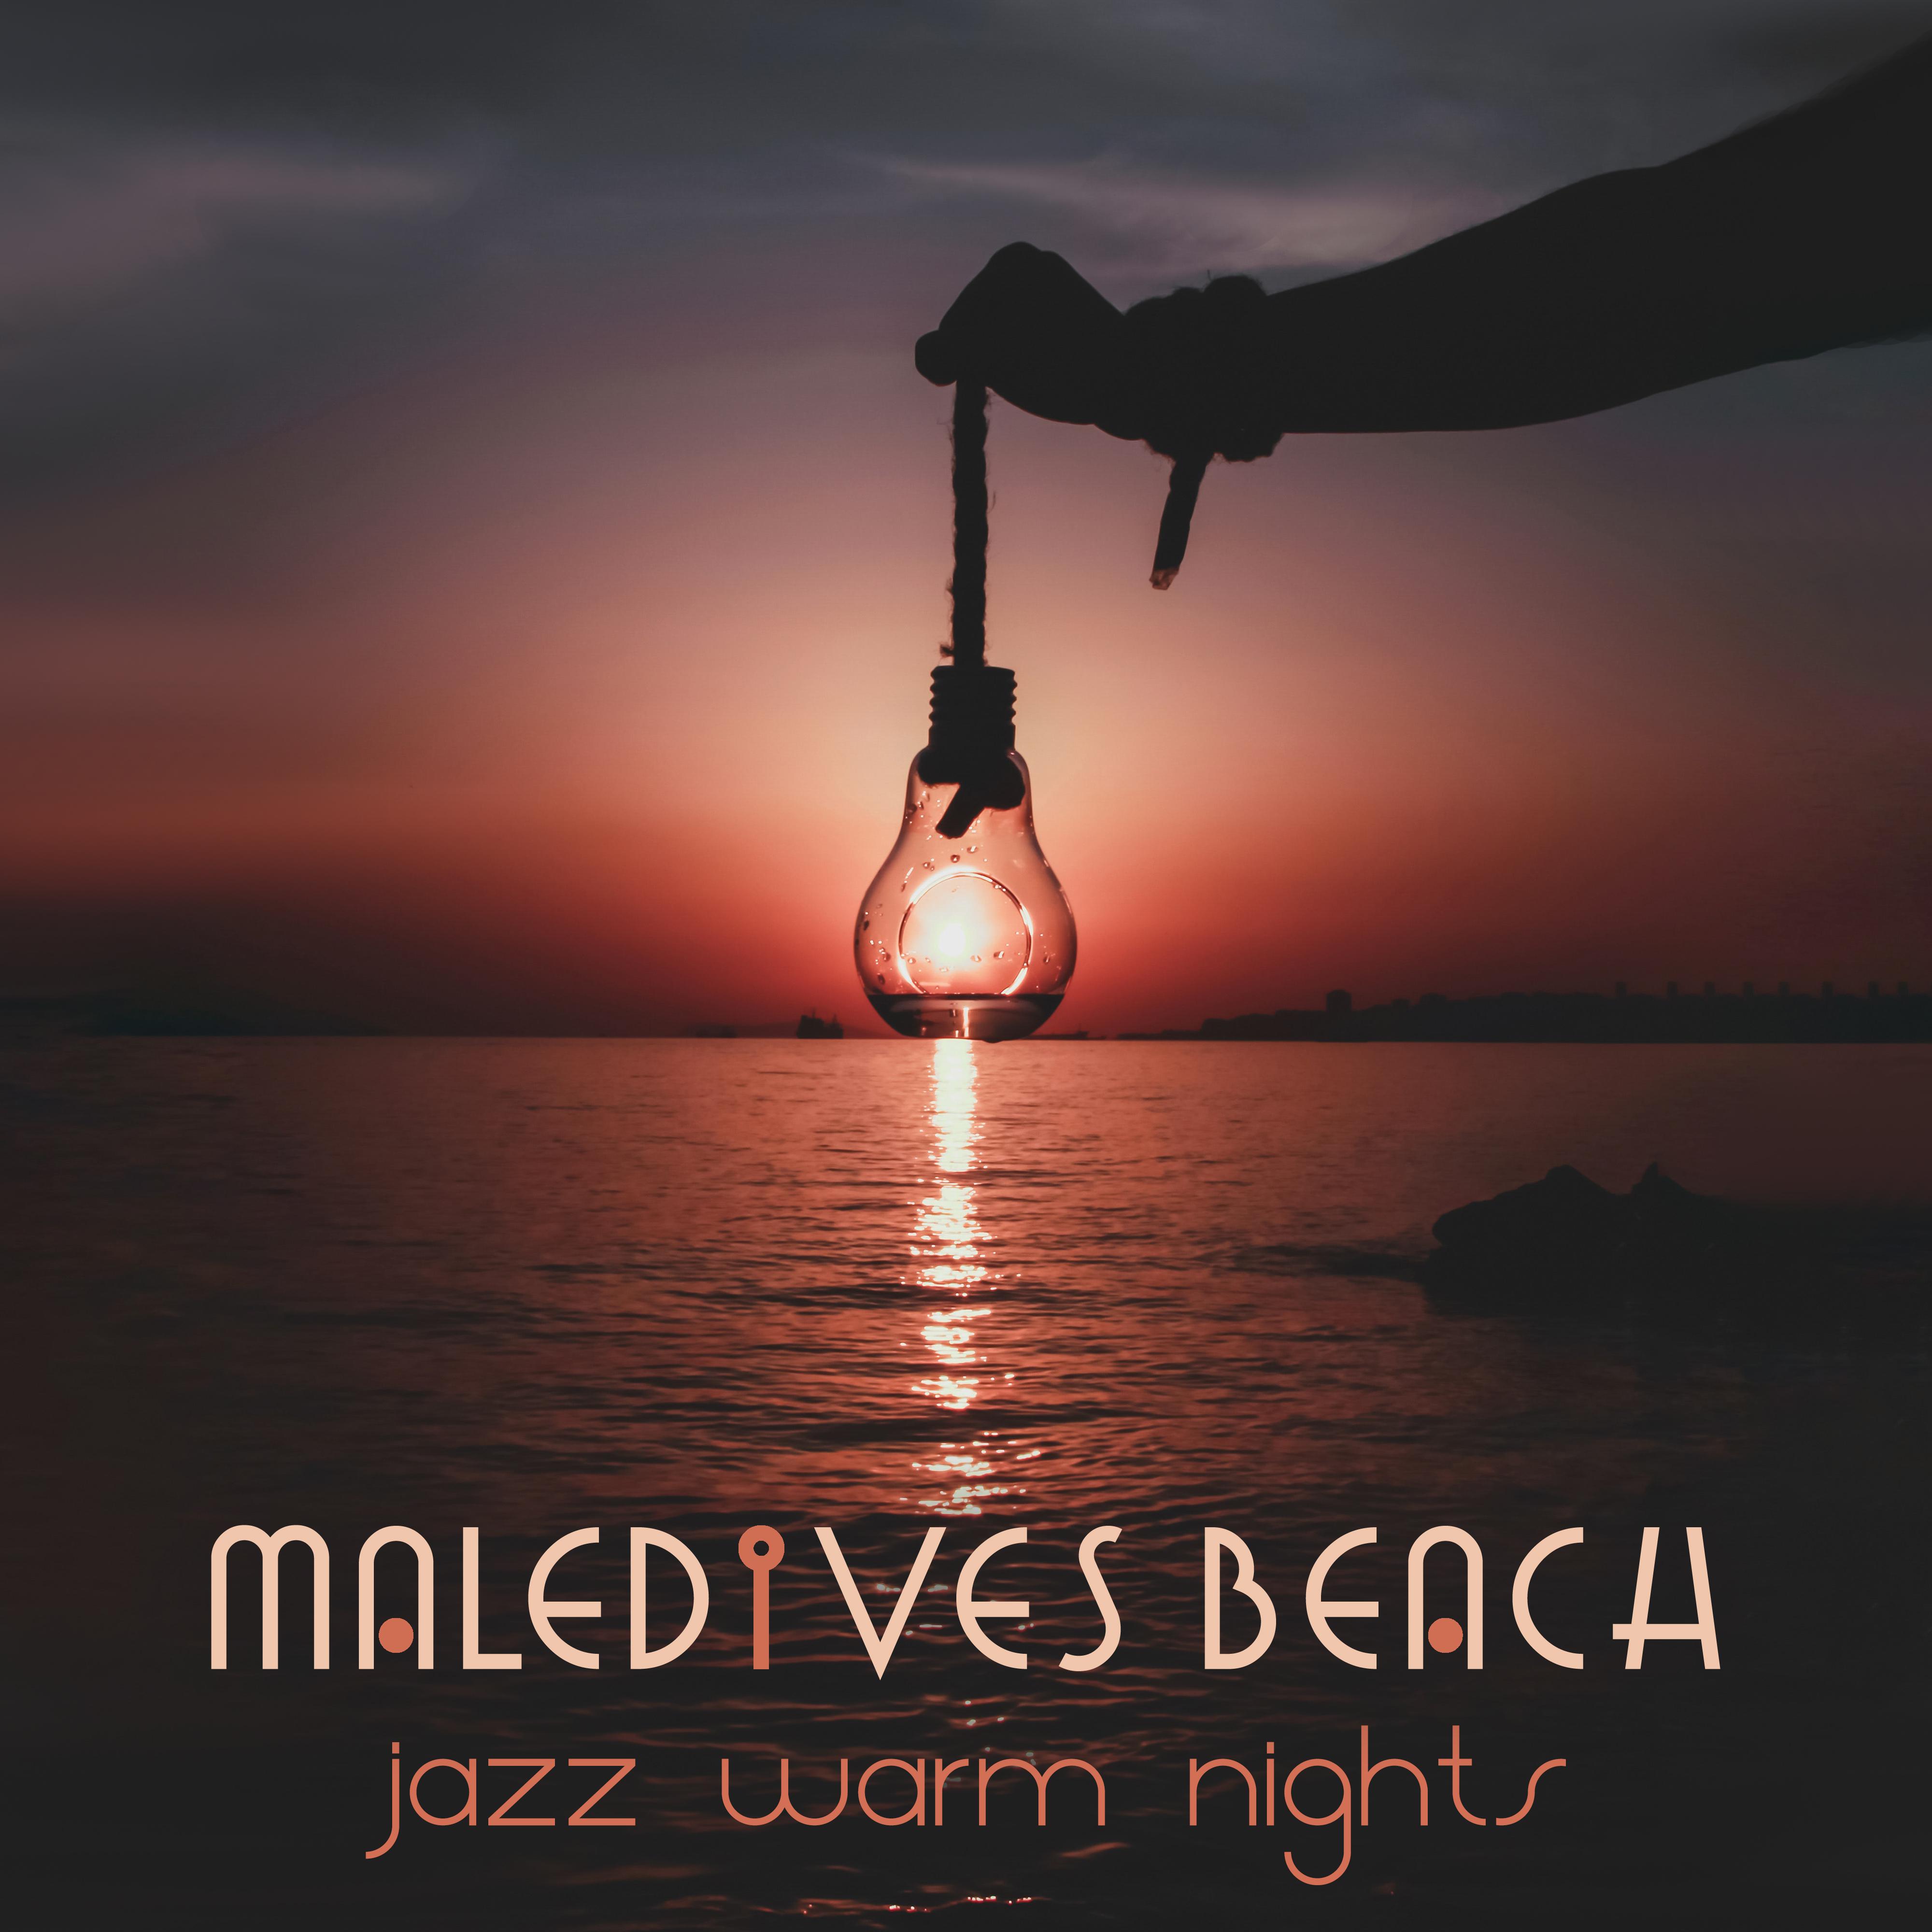 Maledives Beach Jazz Warm Nights: Relaxation Smooth Jazz Mix 2019, Music for Total Calm Down, Stress Relief, Rest, Summer Holiday Songs